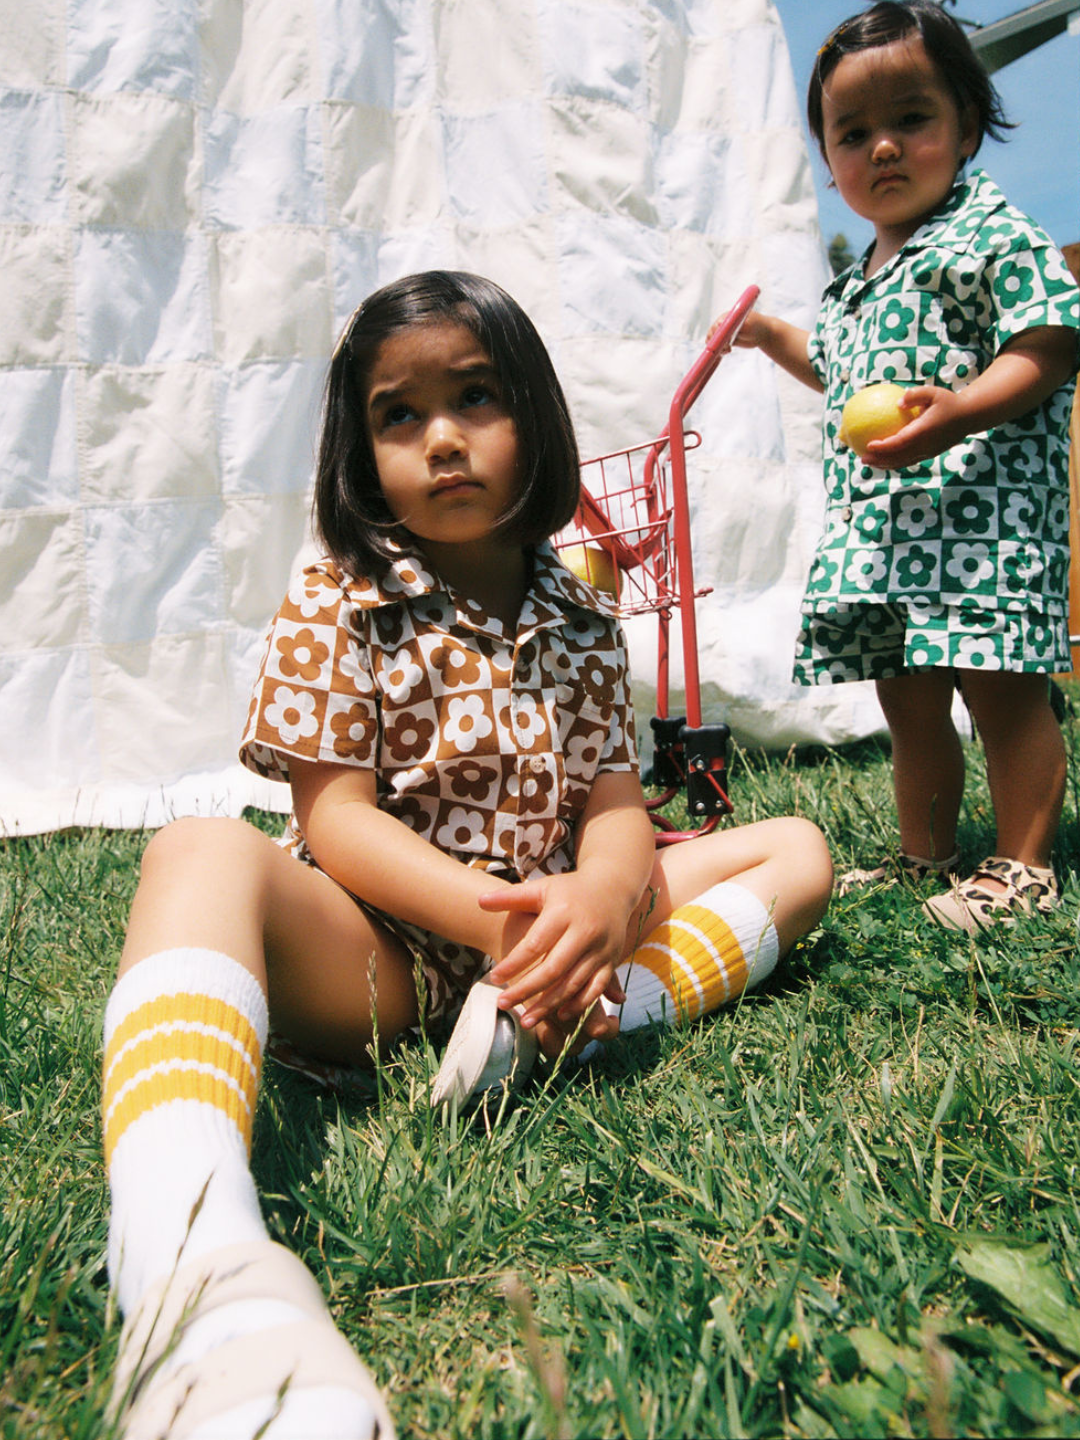 Two children on the grass wearing kids' shirt and shorts sets, one in a checkerboard pattern of terracotta and white flowers, the other with green and white flowers